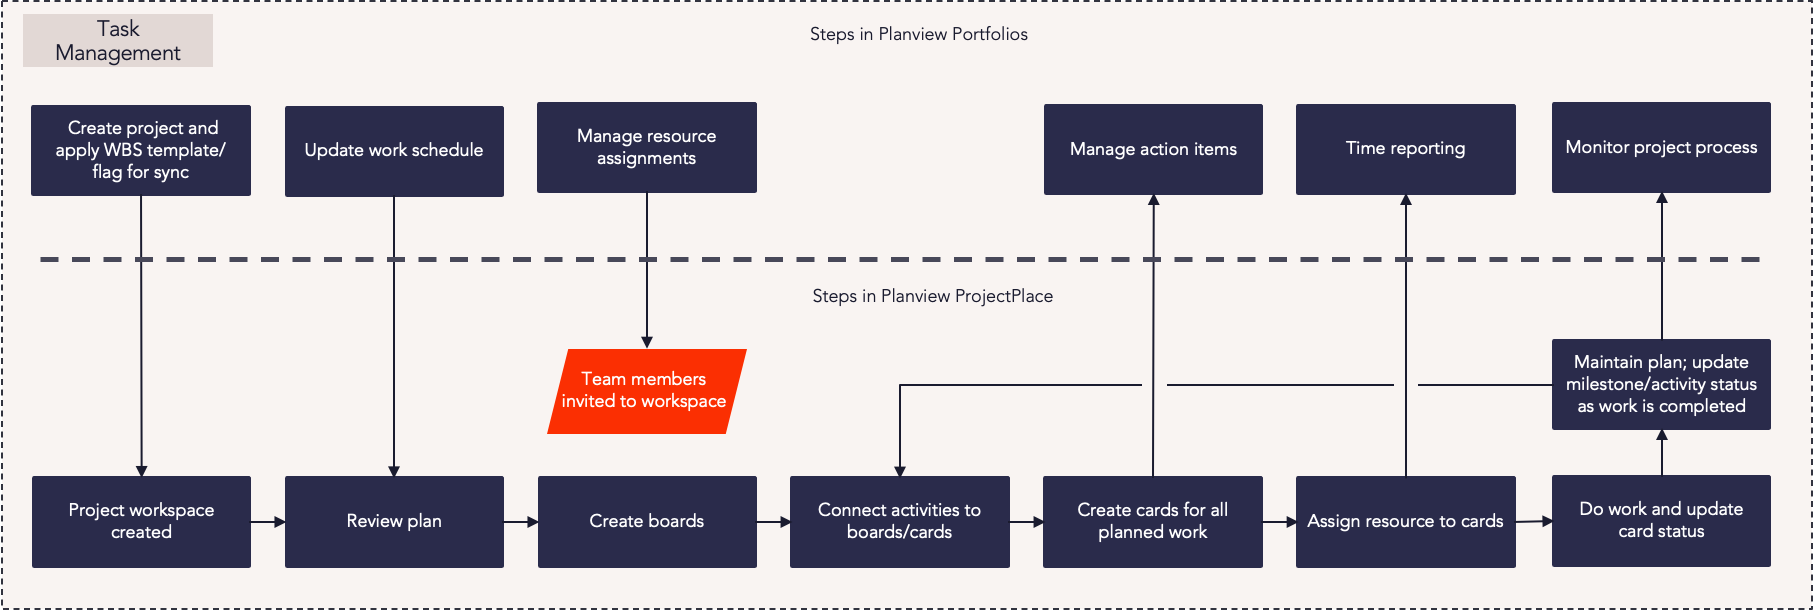 PF - Project Team Delivery - Task Management Process Flow.png